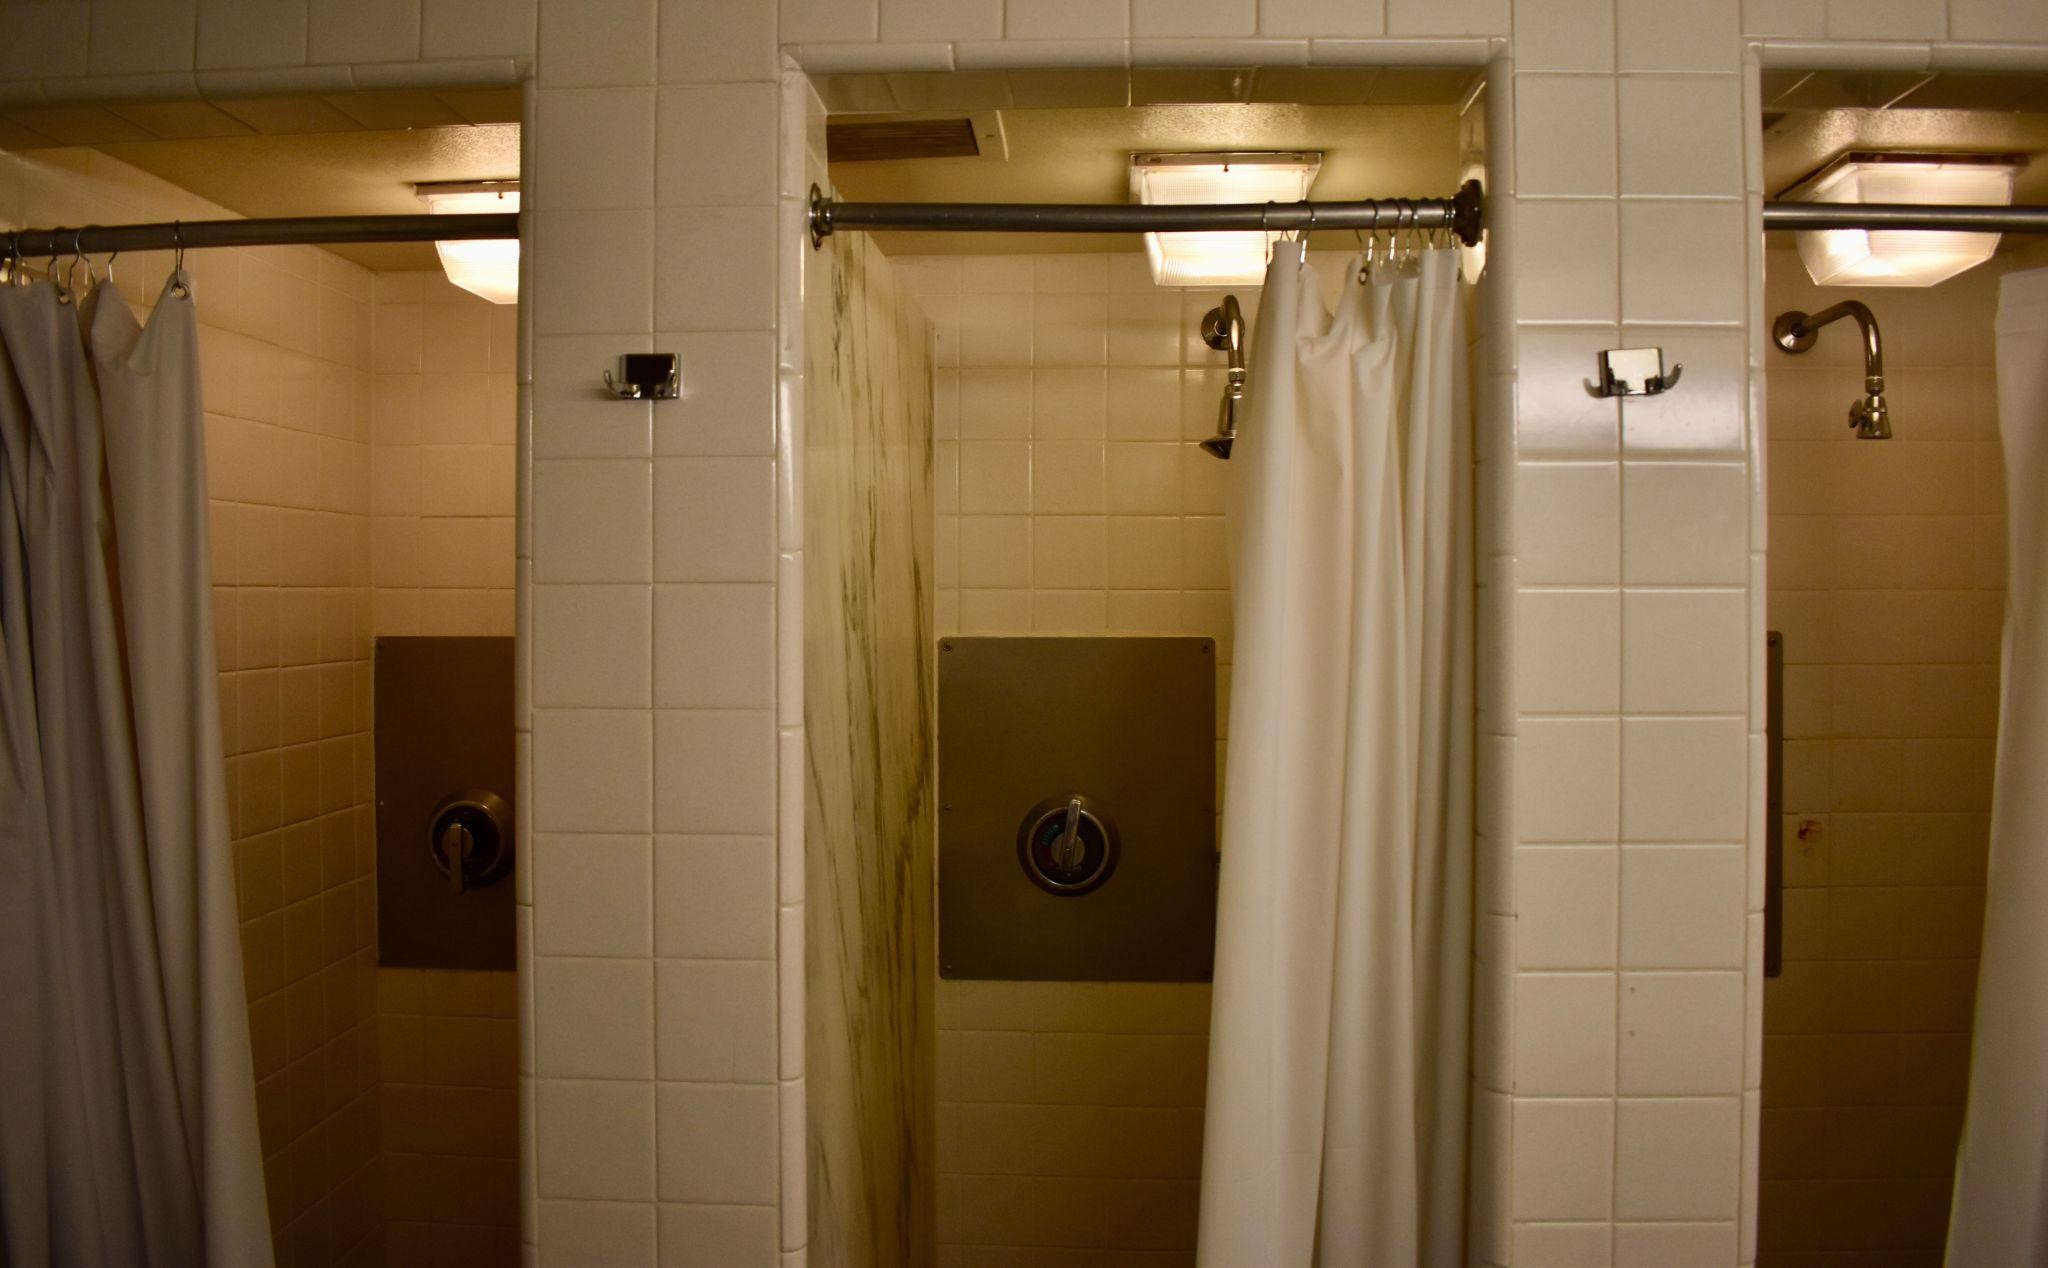 Special Report We Can Totally See You Through The Huge Gap Between The Shower Curtain And Wall